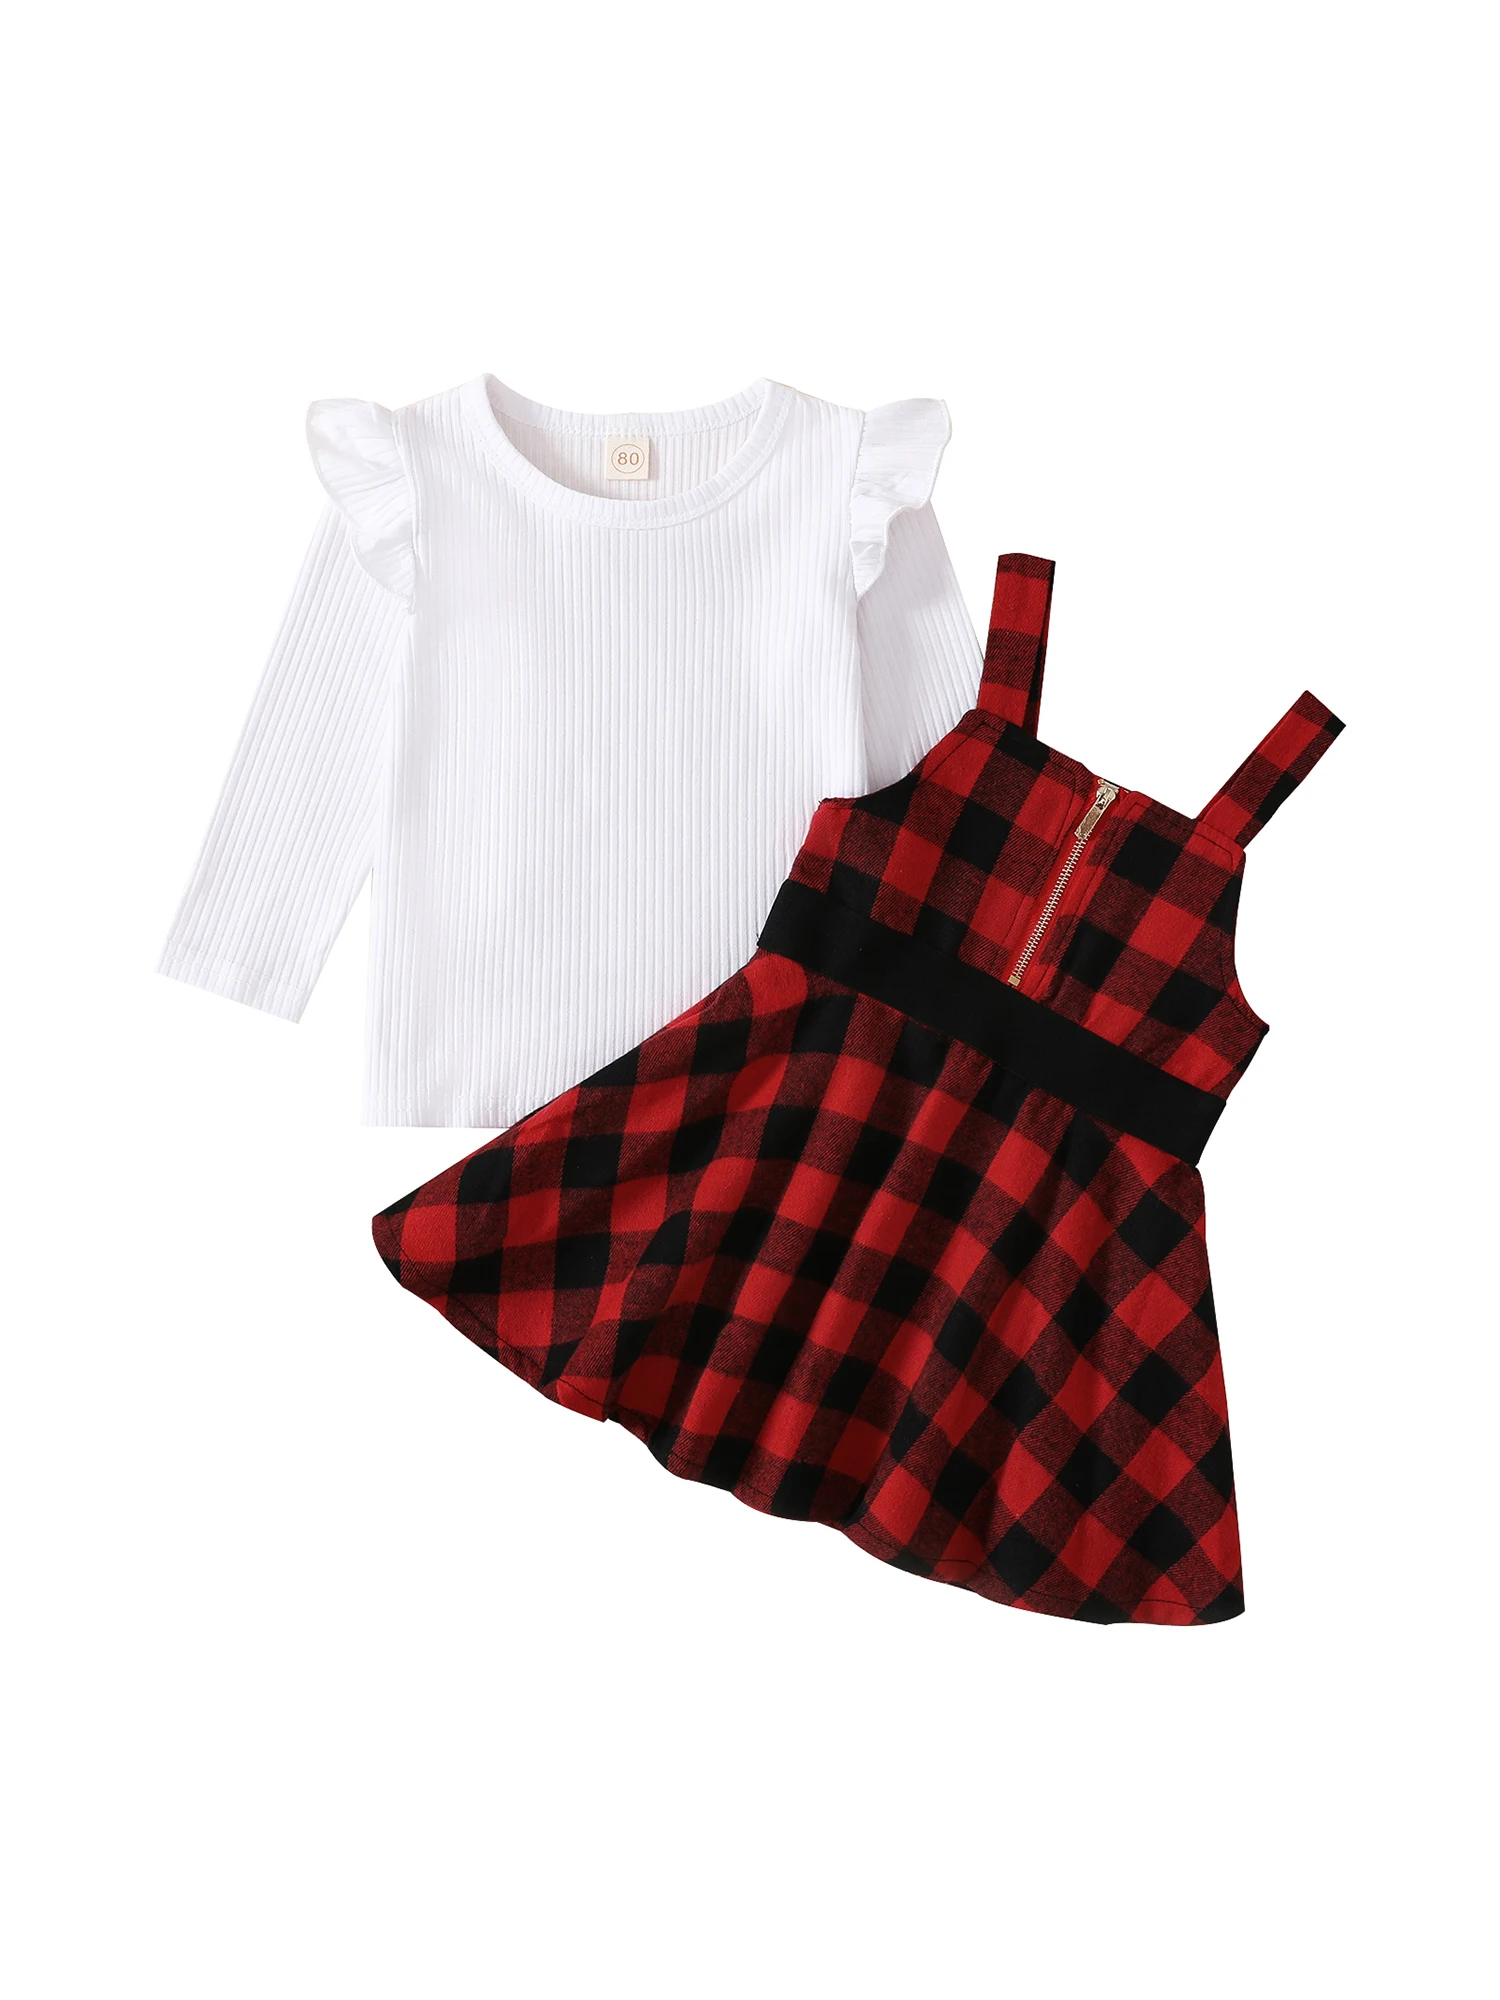 

Toddler Baby Girl Christmas Outfits 2T 3T 4T 5T Solid Knit Rib Long Sleeve Tops Plaid Suspender Skirt Overall Dress Set